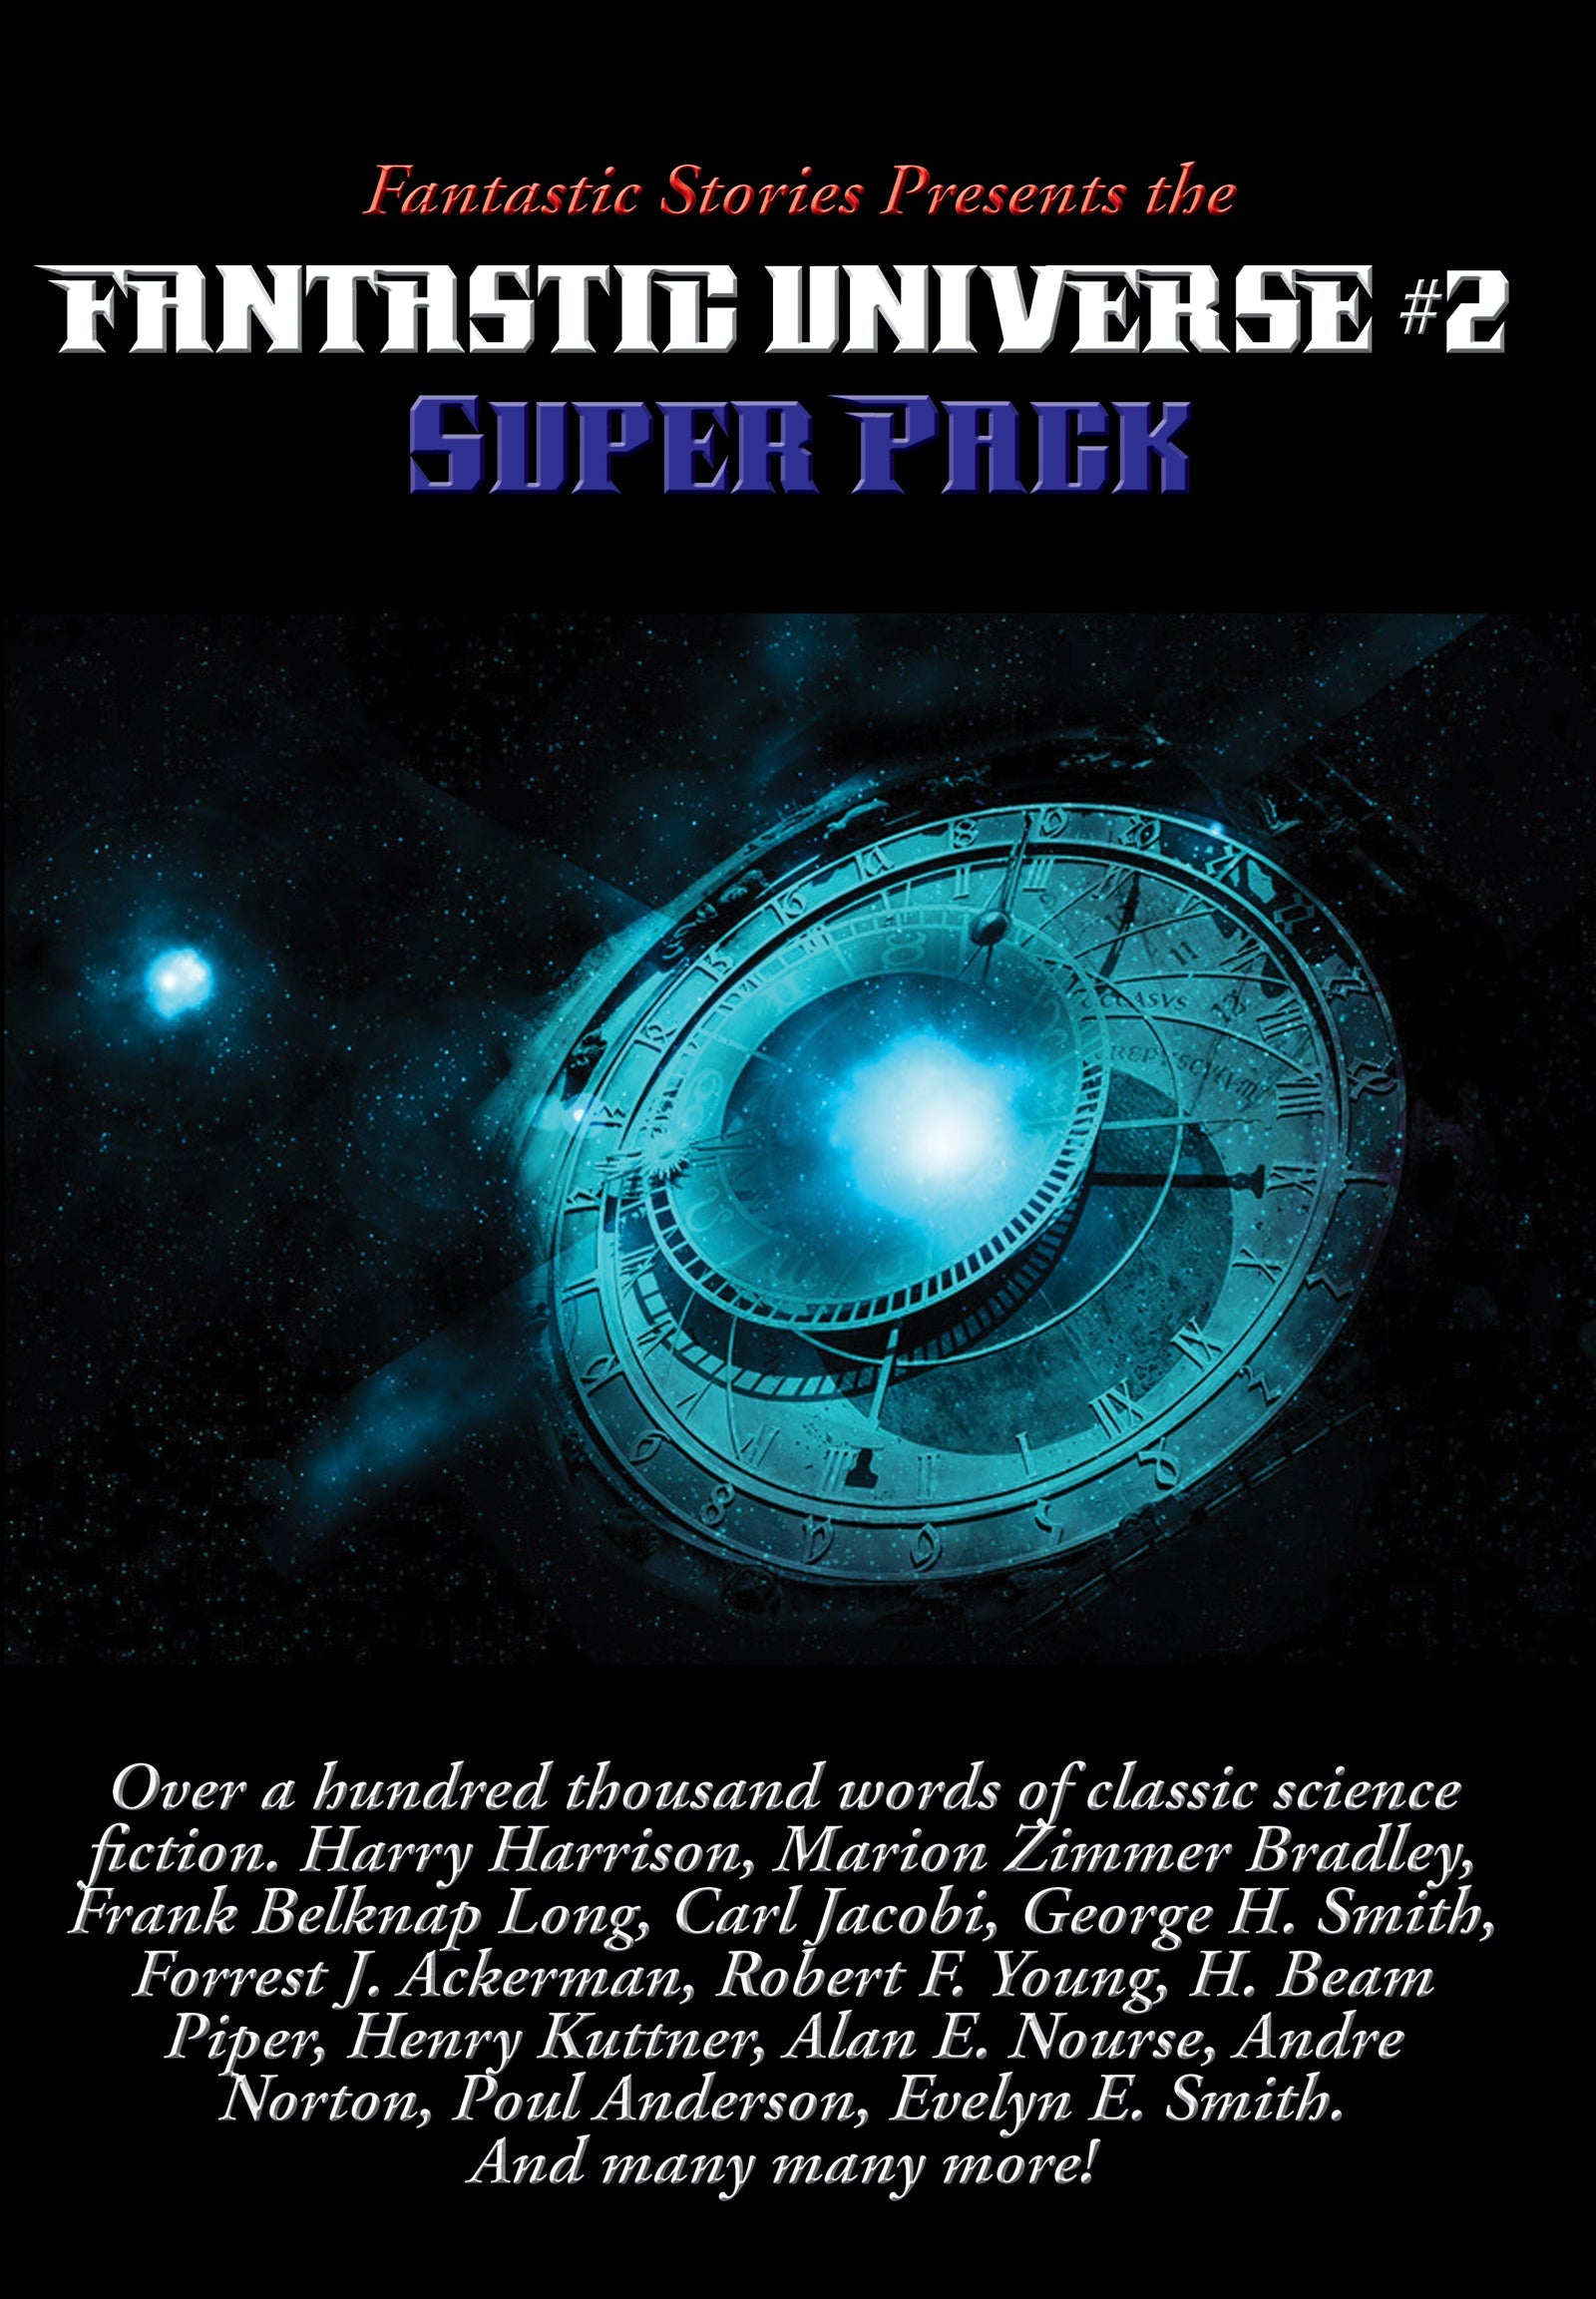 Cover art for Positronic Super Pack #25, the second Fantastic Universe Super Pack.